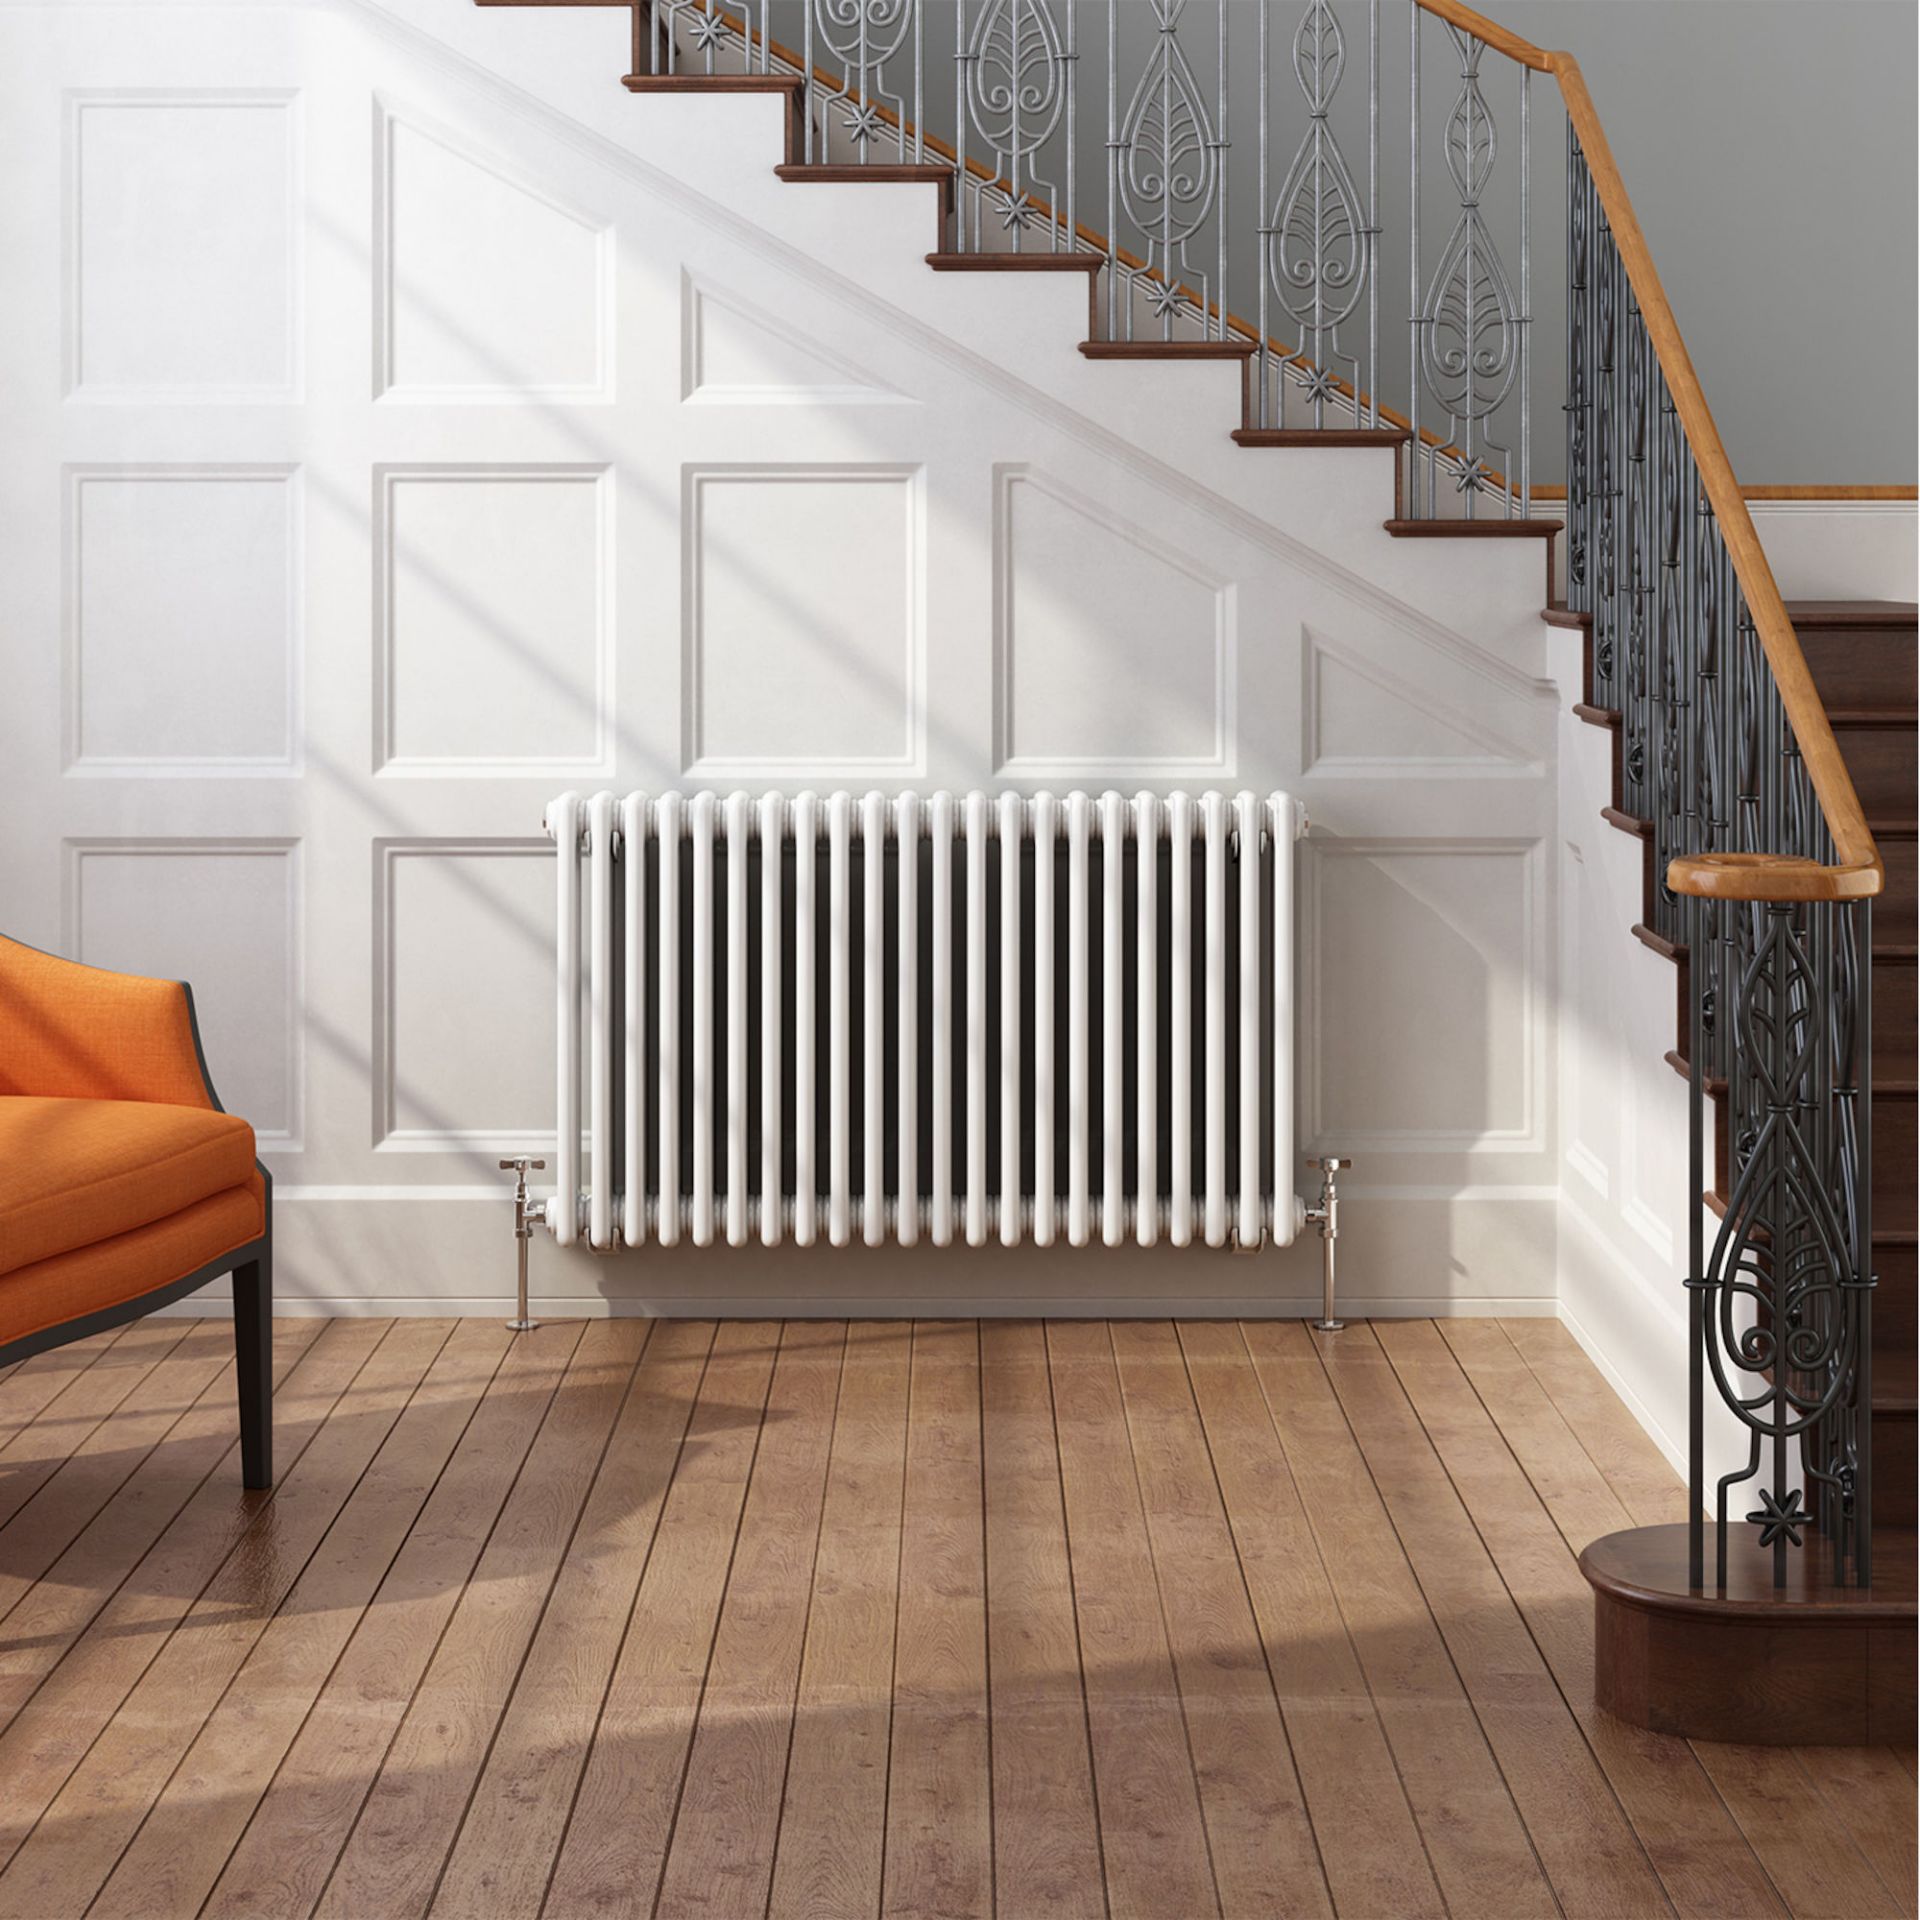 (XS11) 600x1008mm White Double Panel Horizontal Colosseum Traditional Radiator. RRP £429.99. Made - Image 5 of 5